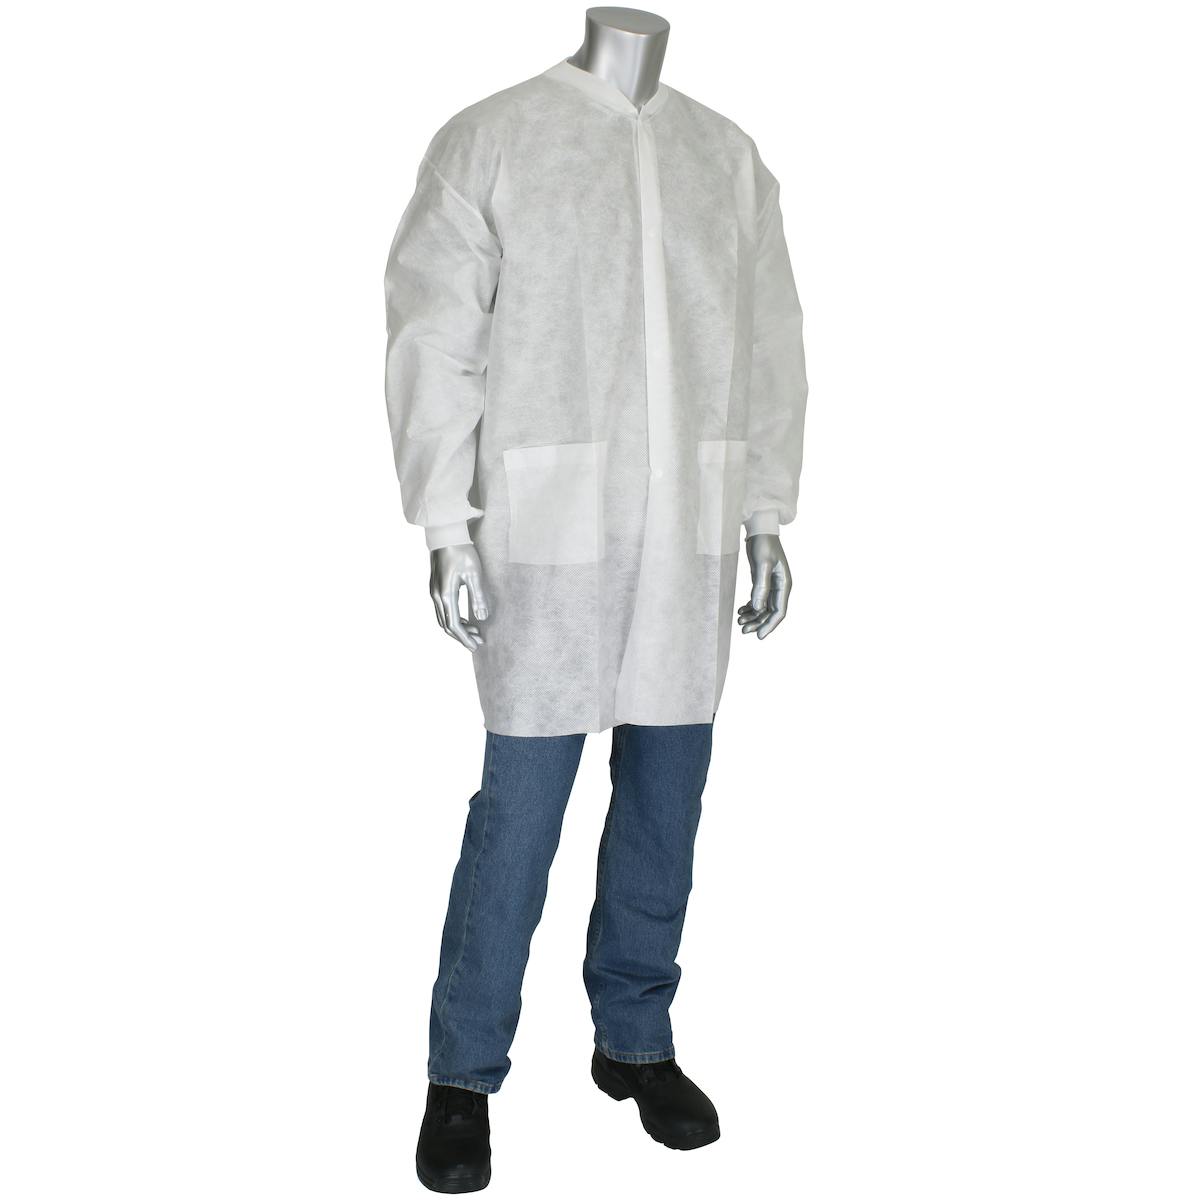 Standard Weight SBP Lab Coat - Two pockets 37 gsm, White (C3828)